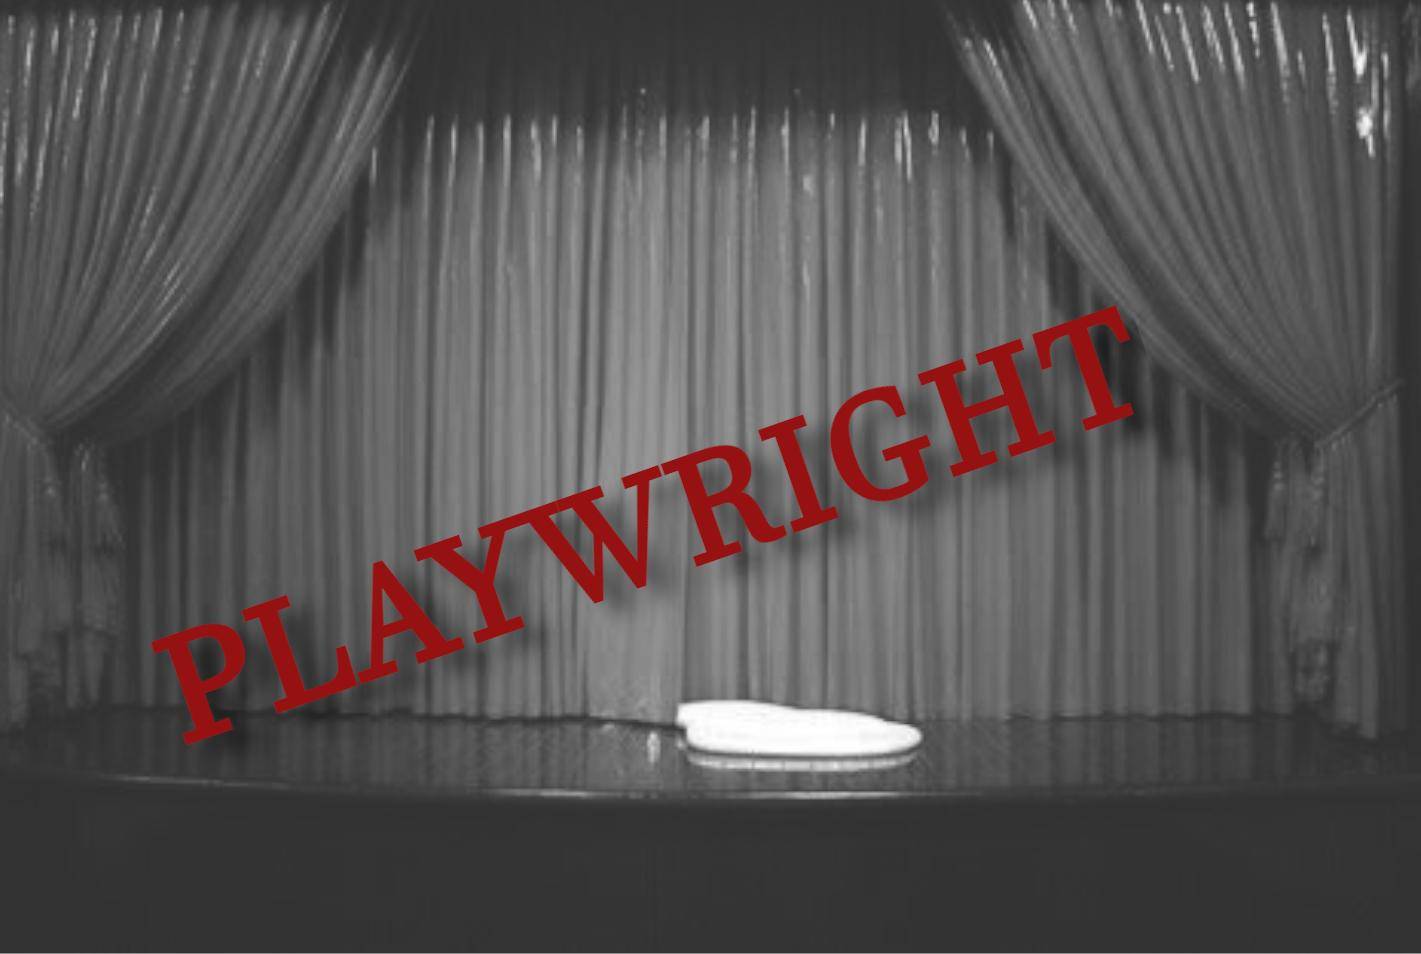 The Playwright - a Satirical Dramedy about the Theatre